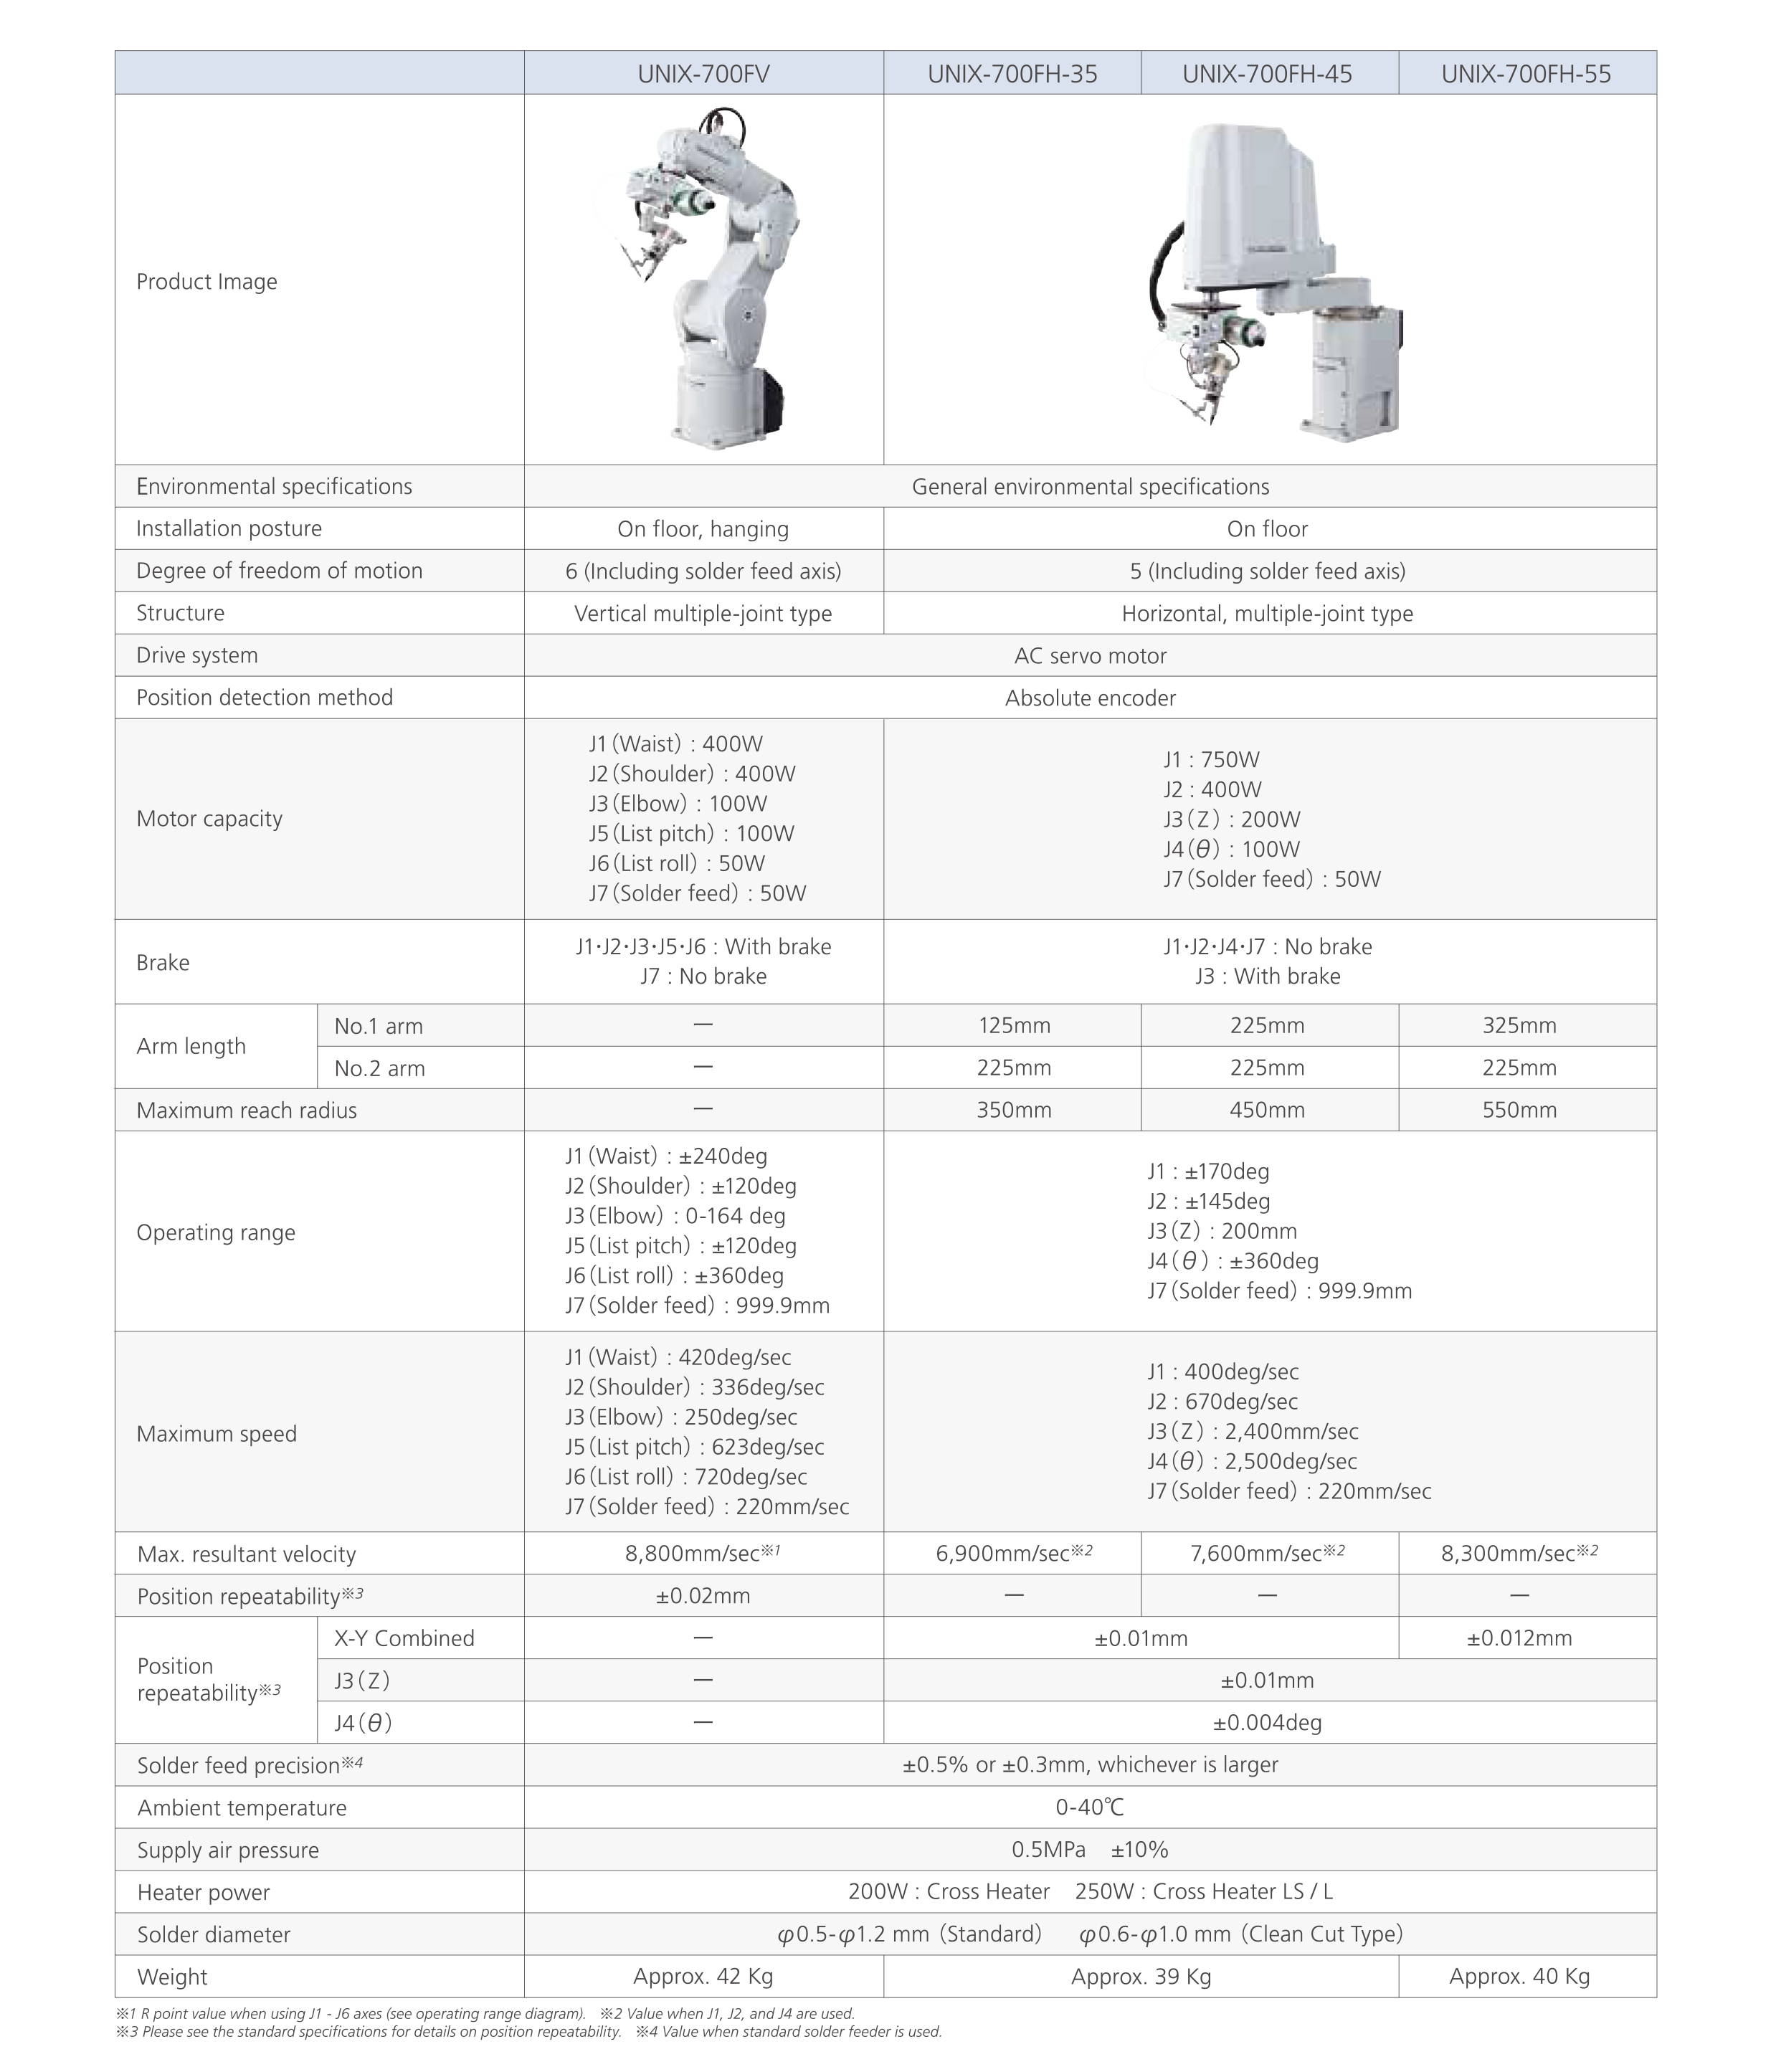 inline-robot-technical-specifications